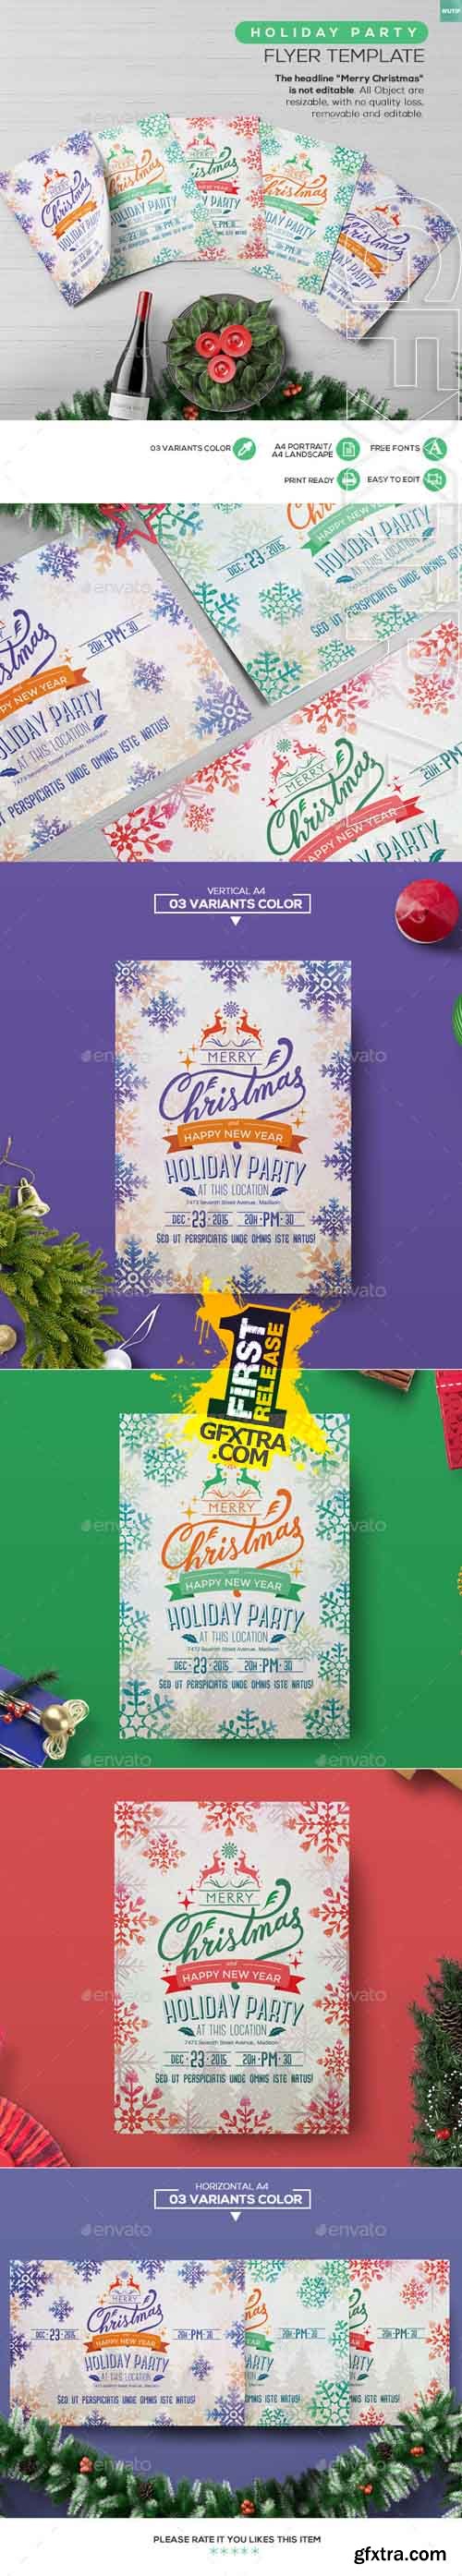 GR - Holiday Party Flyer Template 13561858